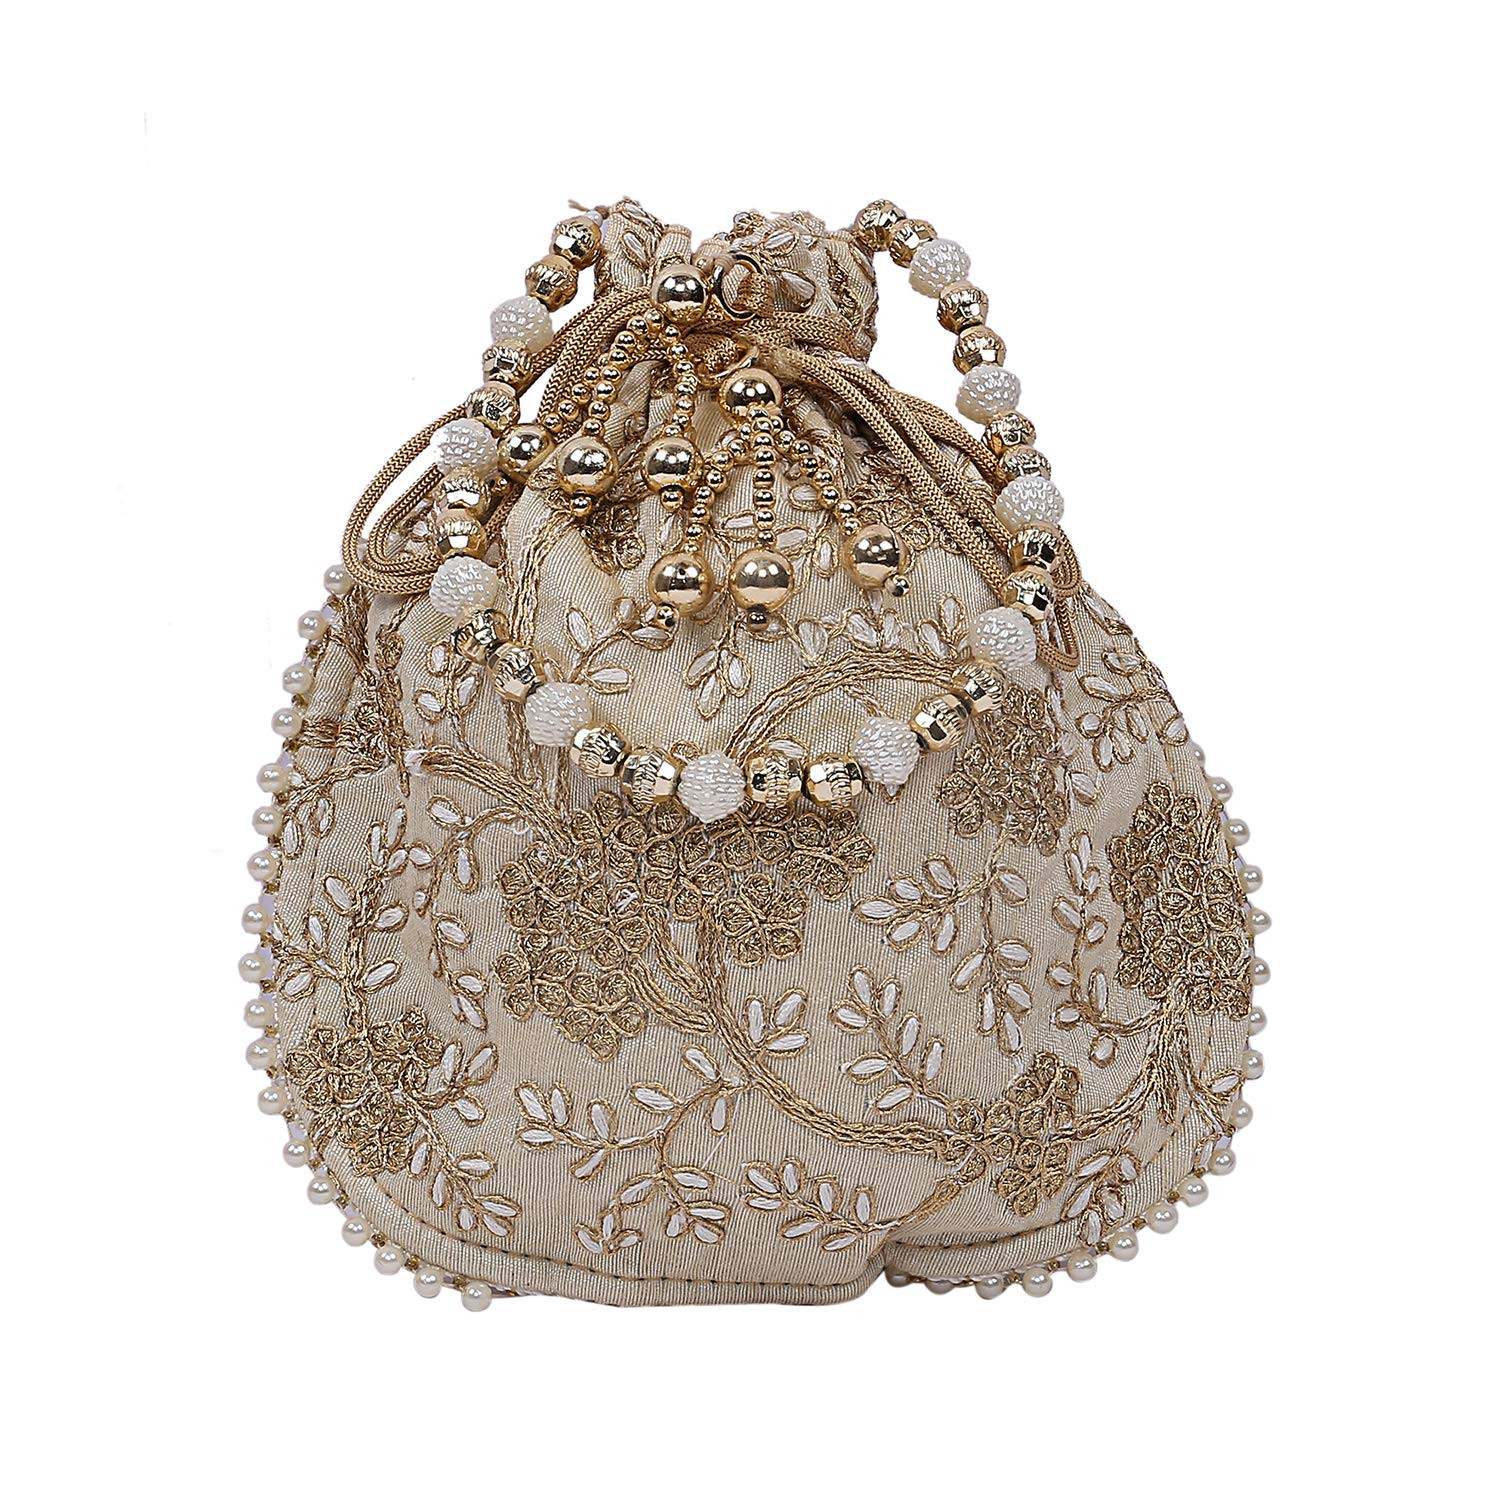 Kuber Industries Embroidery Drawstring Potli|Hand Purse With Gold Pearl Border & Handle For Woman,Girls (Cream)